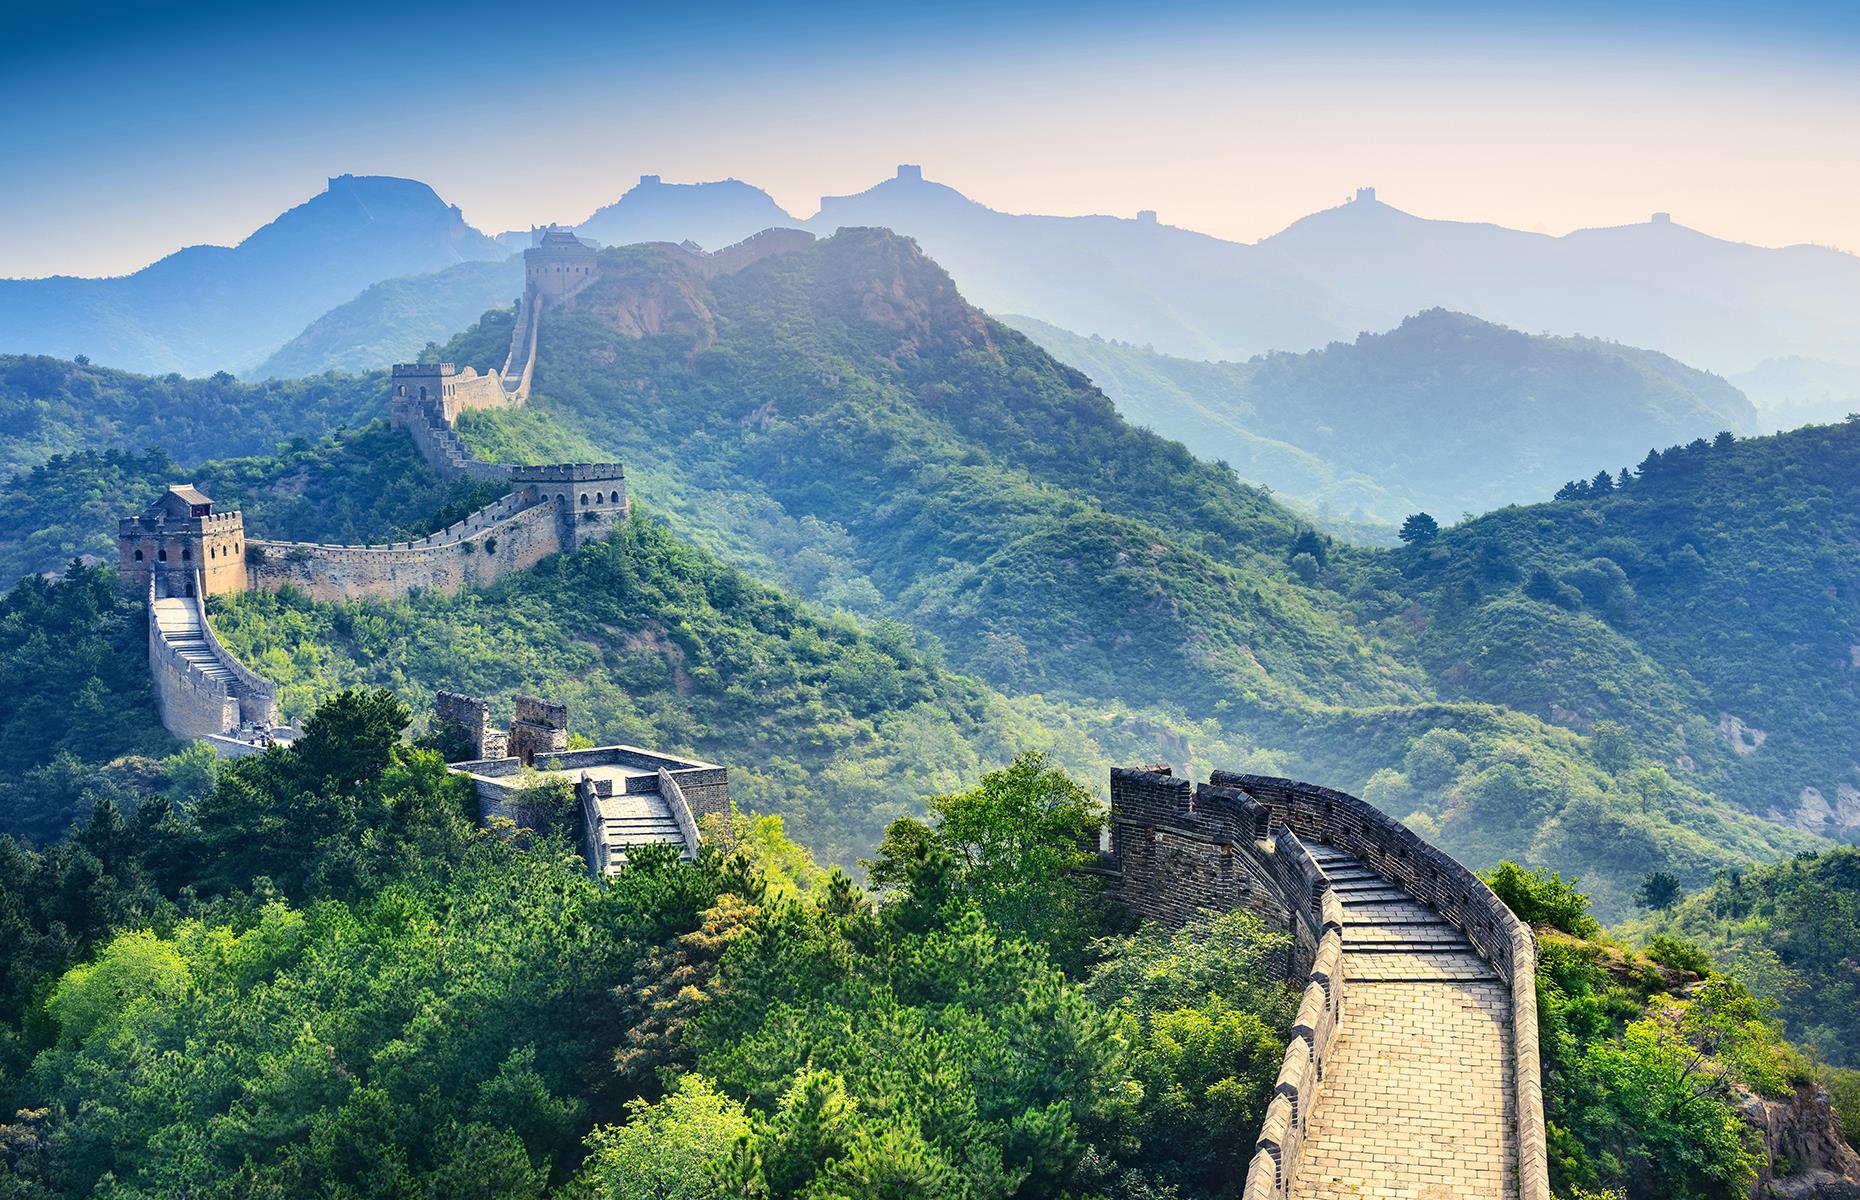 <p>Stretching thousands of miles across China, various iterations of the Great Wall have existed since the 7th century BC – though most of what you can see today dates back to the Ming Dynasty (1368-1644). You can't walk the entire thing, but some sections are an easy day trip from Beijing.</p>  <p><strong><a href="https://www.loveexploring.com/galleries/84013/secrets-of-the-worlds-most-famous-walls?page=1">Discover the secrets of the world's most famous walls</a></strong></p>